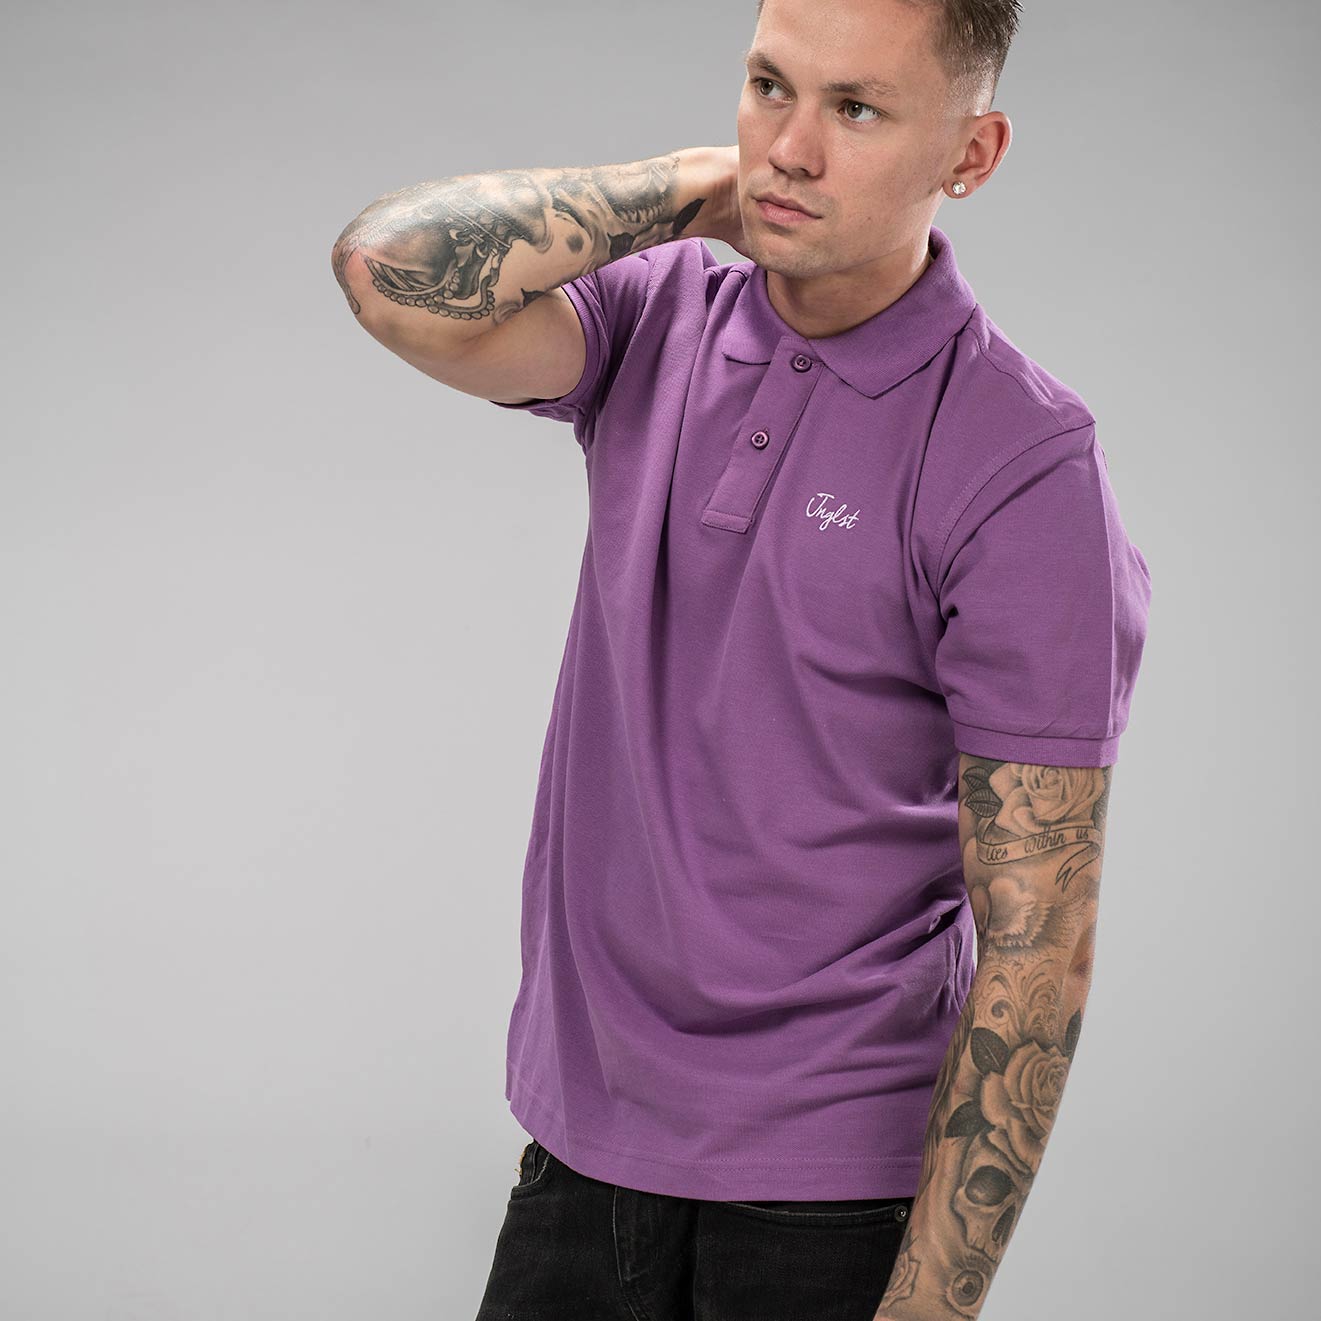 Polo Shirt by Jnglst Clothing